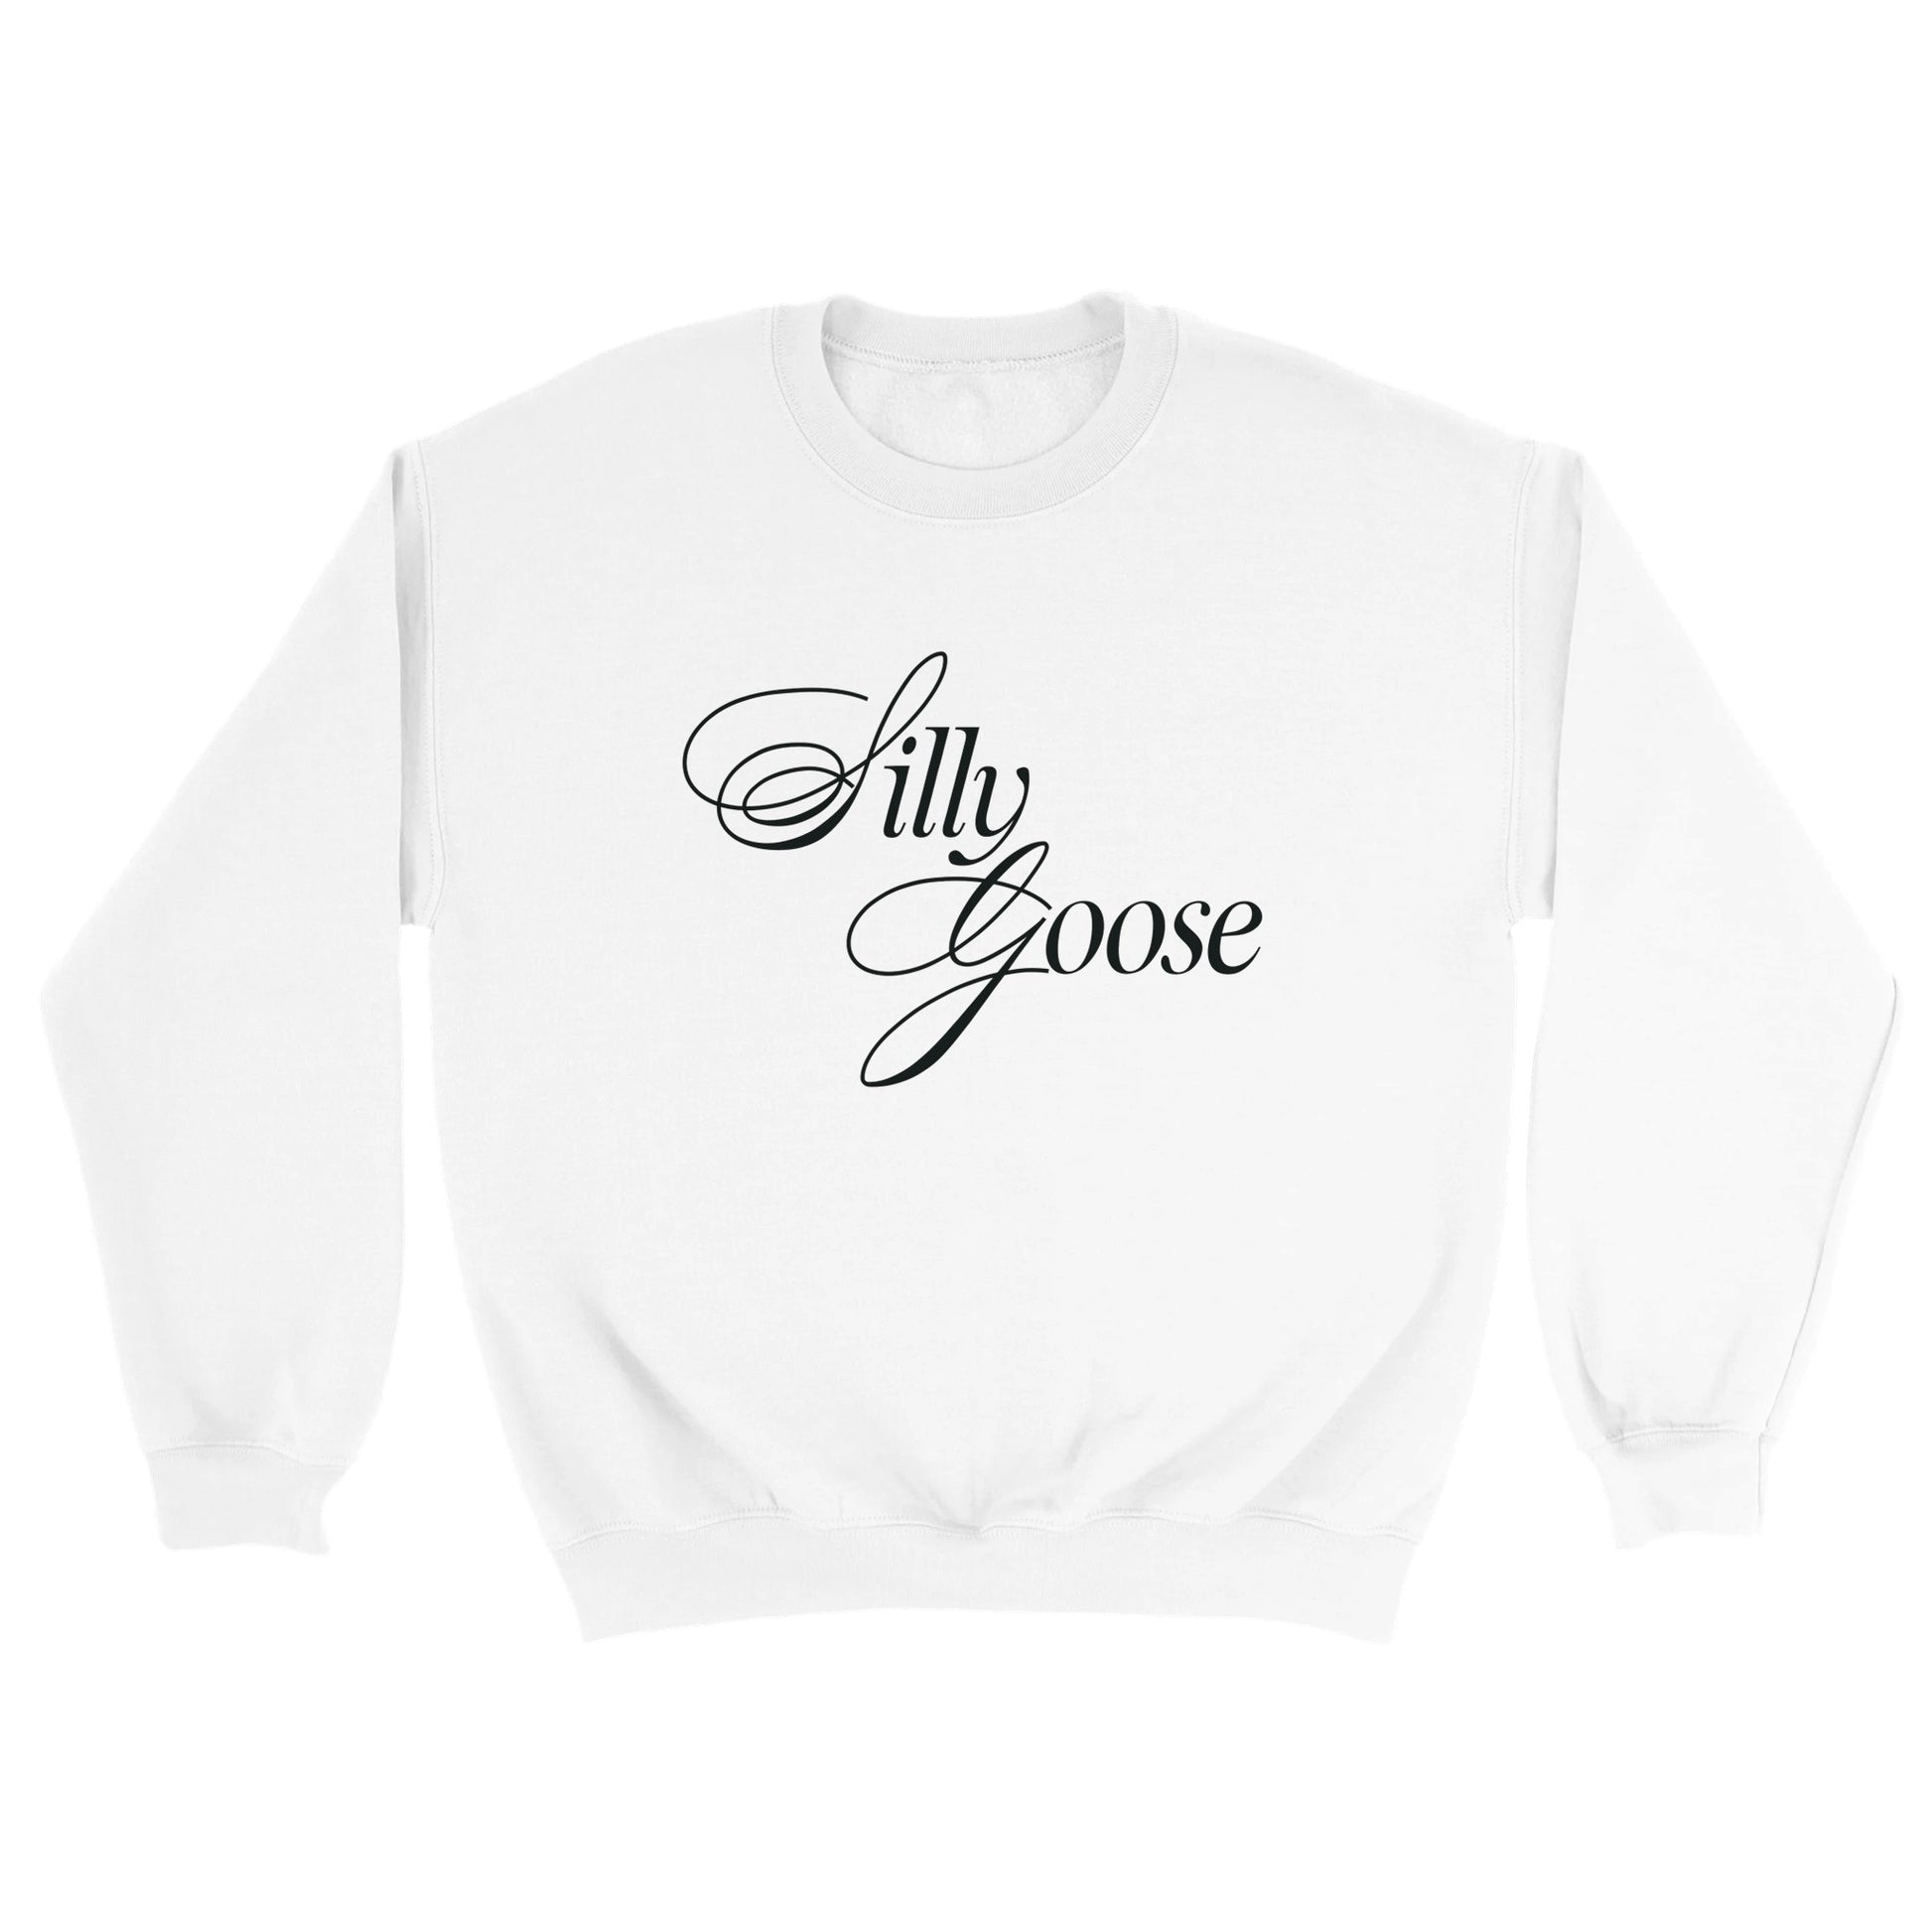 a white sweater with the word Silly Goose printed on